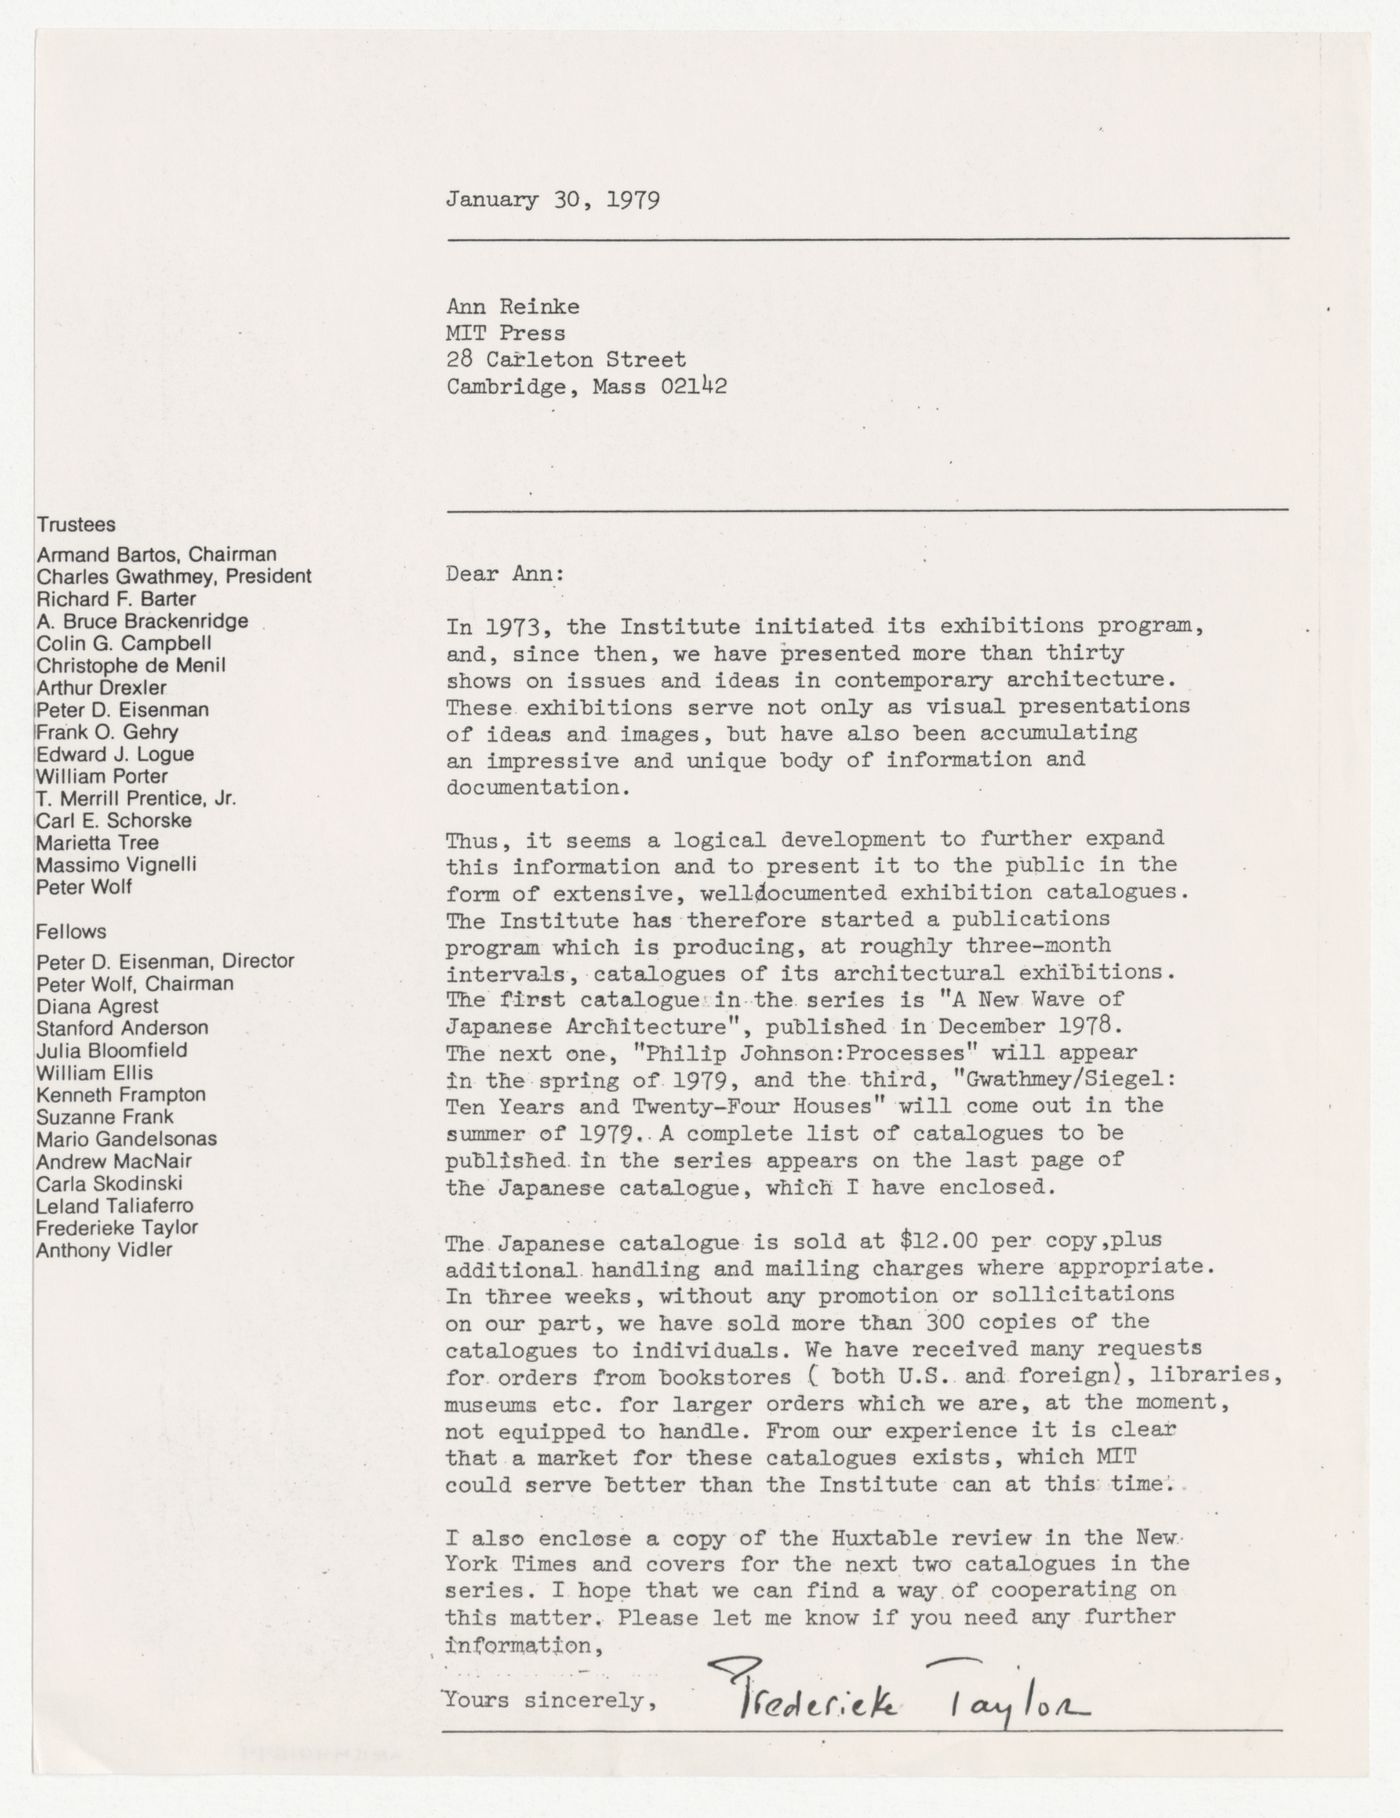 Letter from Frederieke Taylor to Ann Reinke about possible involvement of MIT Press in IAUS's exhibition catalogue program